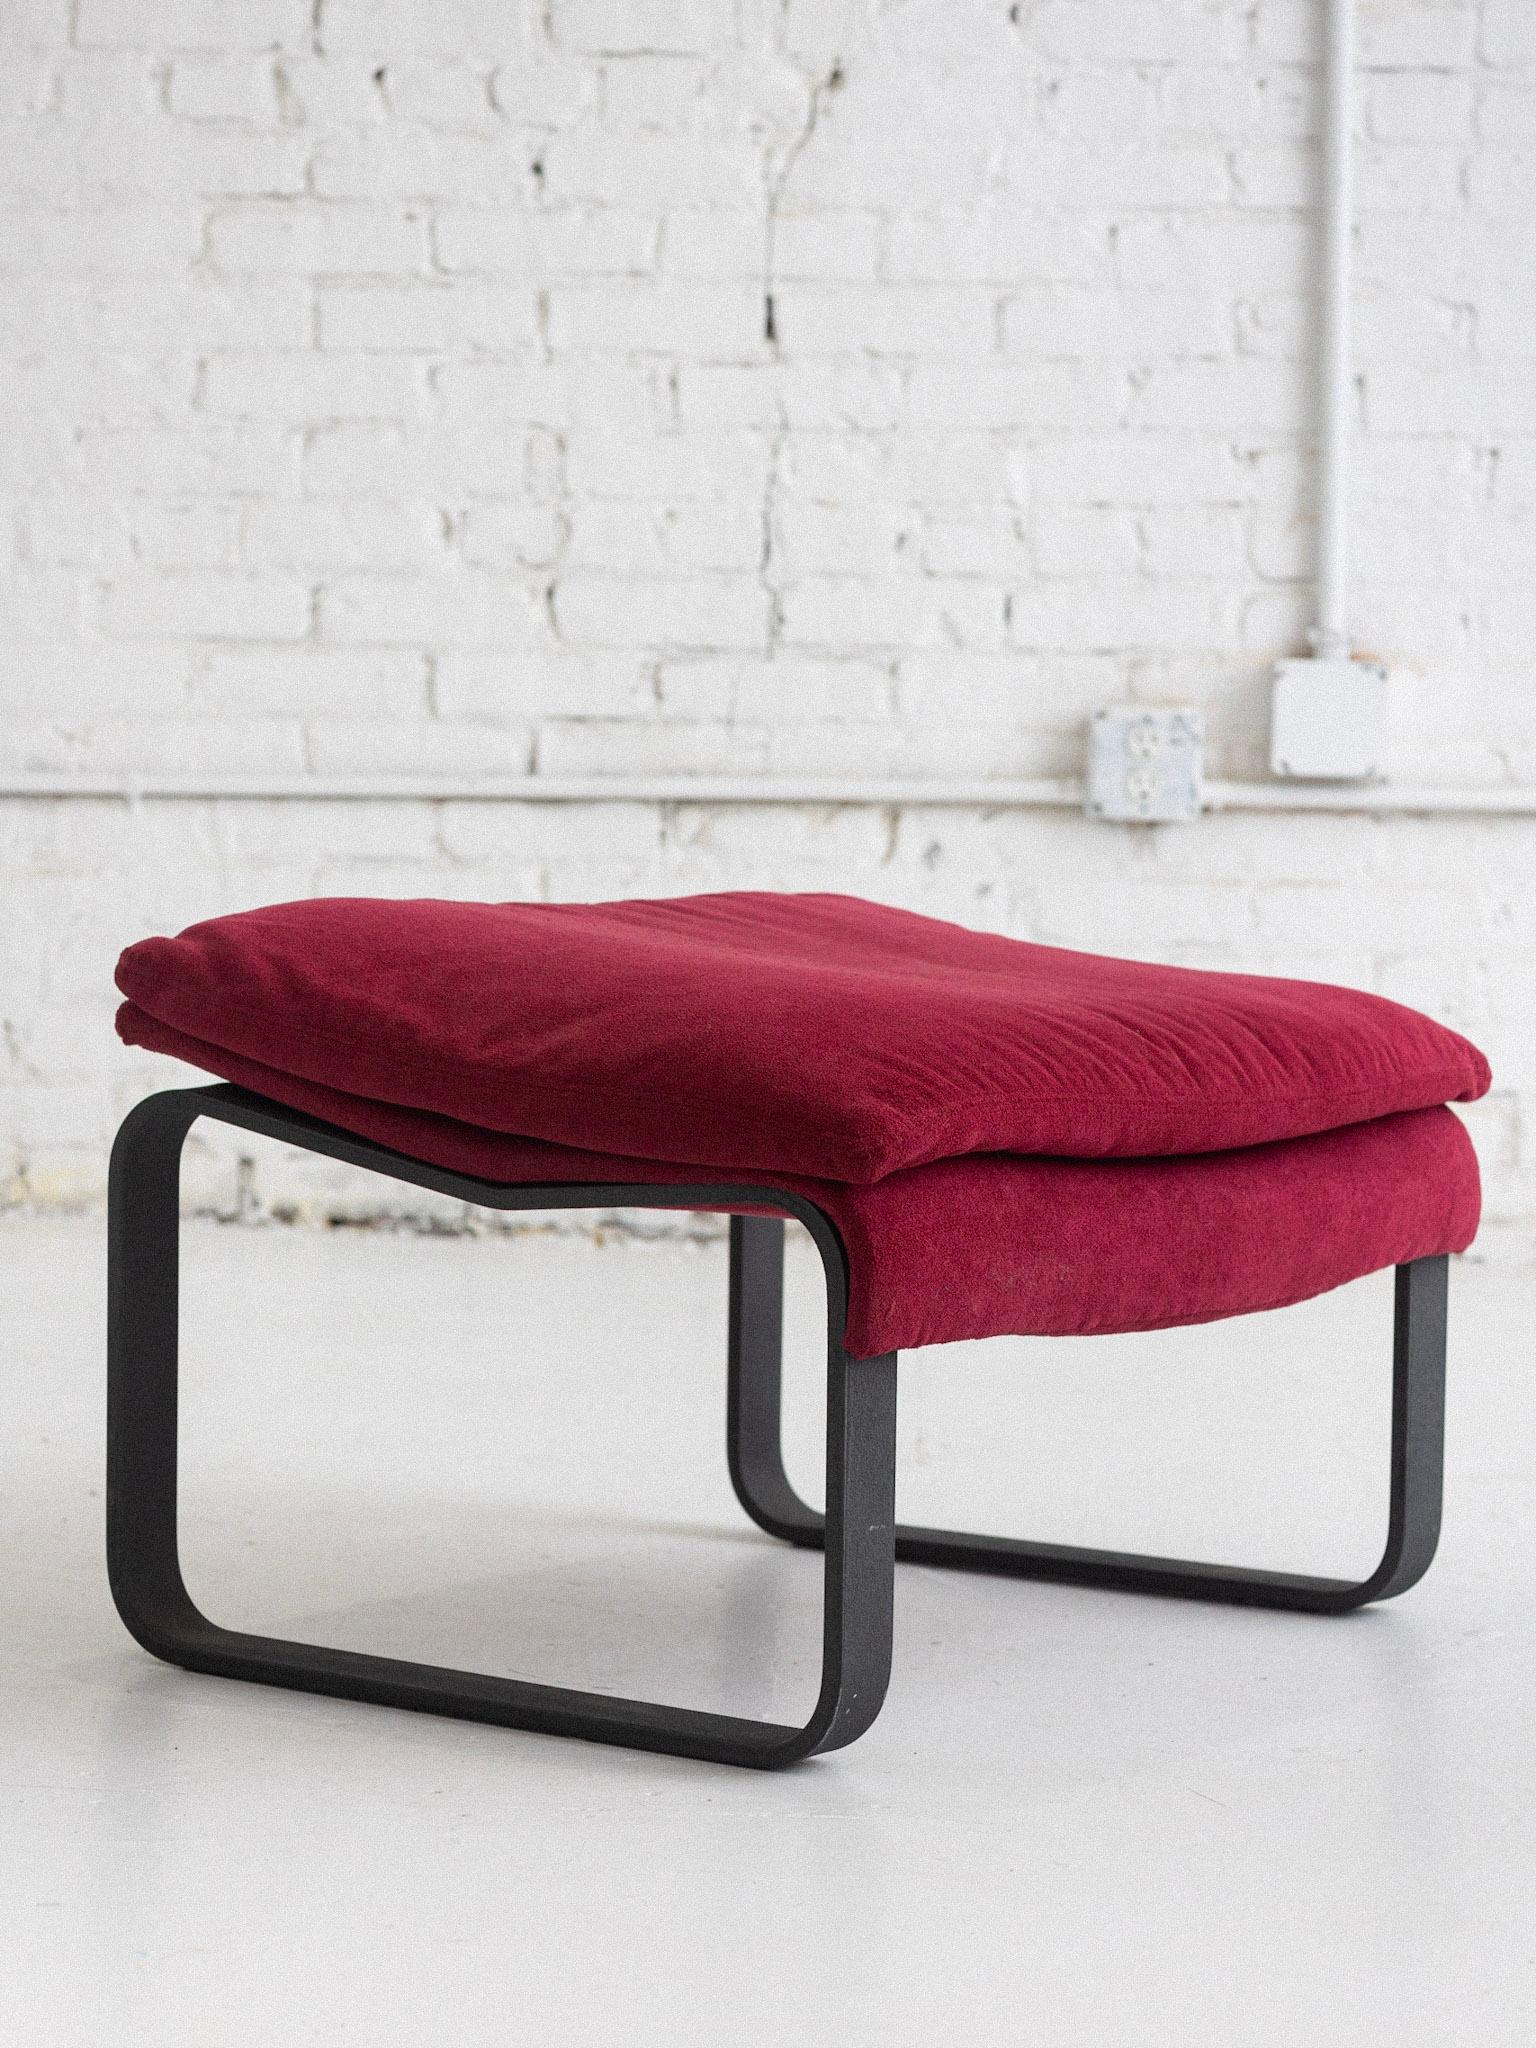 A “Wave” ottoman by Giovanni Offredi for Saporiti. Heavy textured metal base supports a wave form upholstered footrest. Original red textured upholstery. 2 chairs and 1 ottoman available, all sold separately. Sourced in Northern Italy.